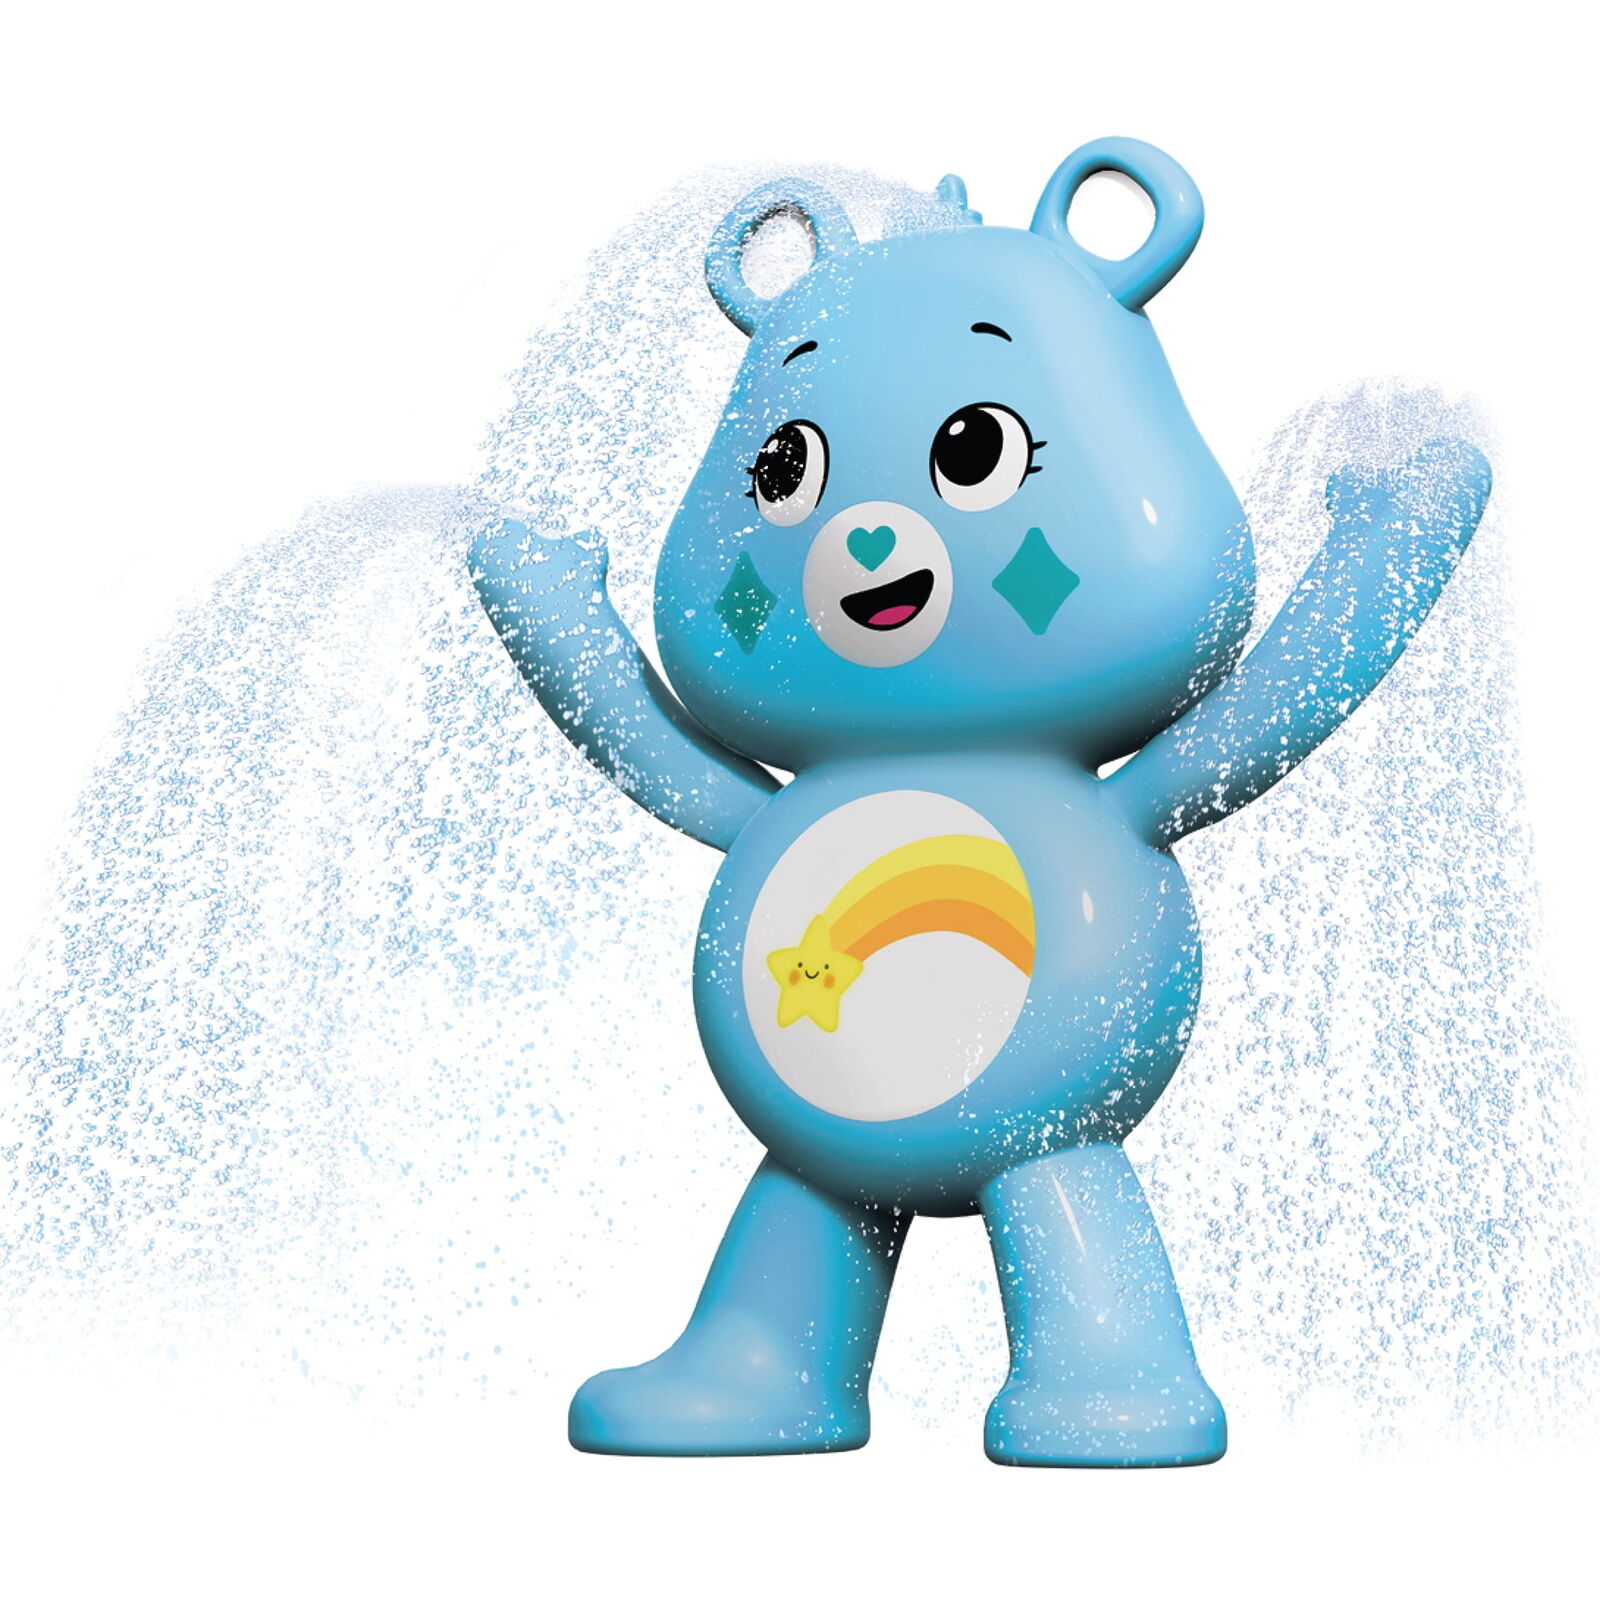 Care Bears XL 60 ft. Inflatable Statue with Stationary Sprinklers for Kids Ages